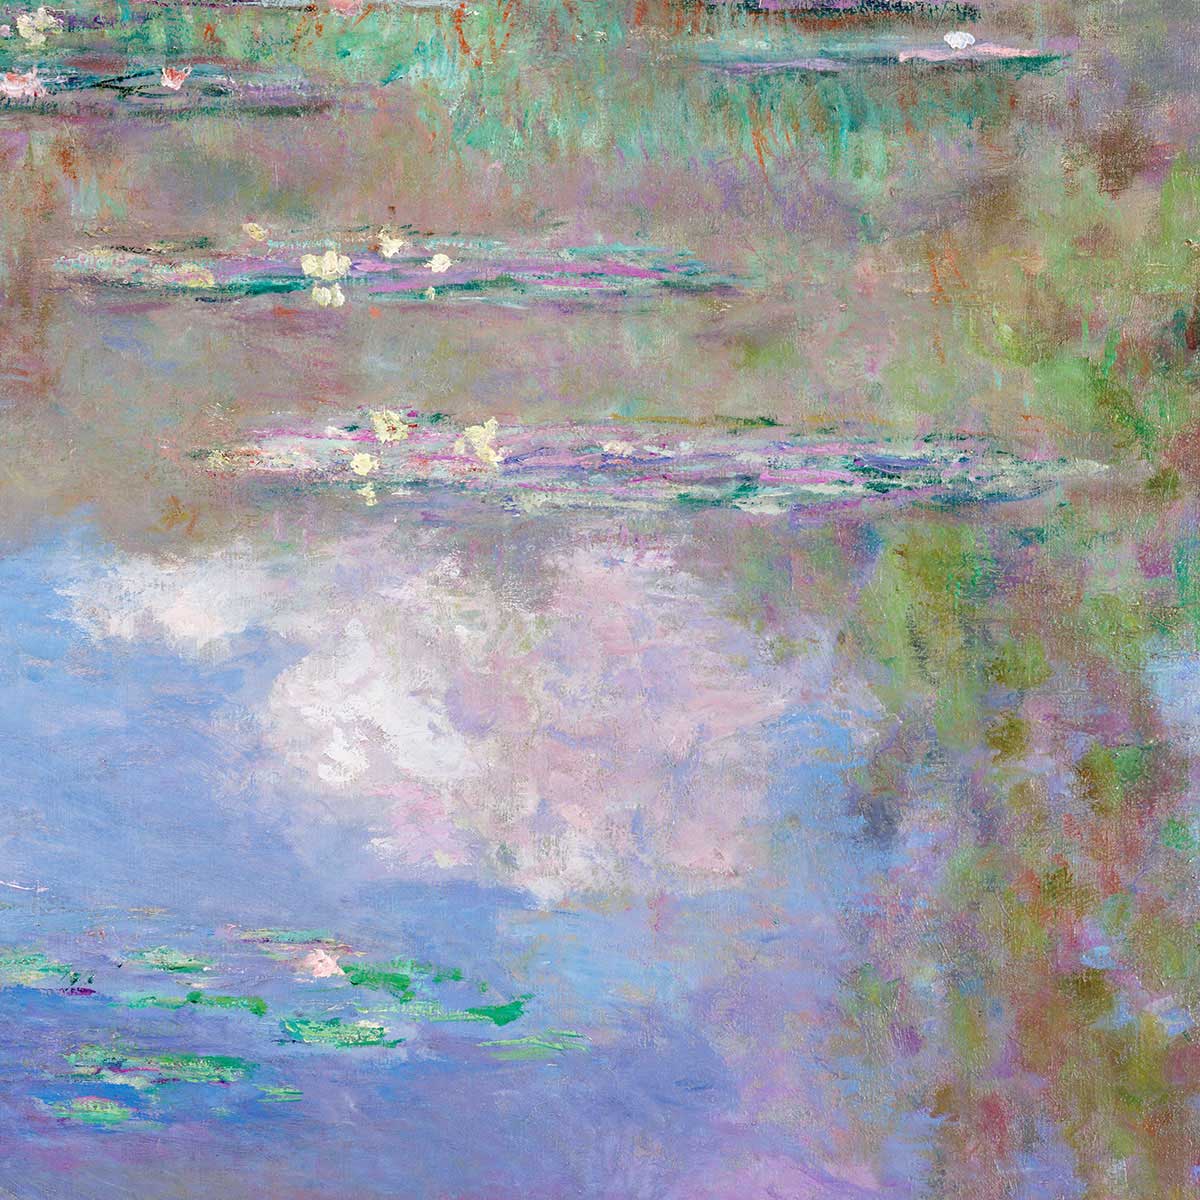 The Waterlily Pond by Claude Monet Art Exhibition Poster